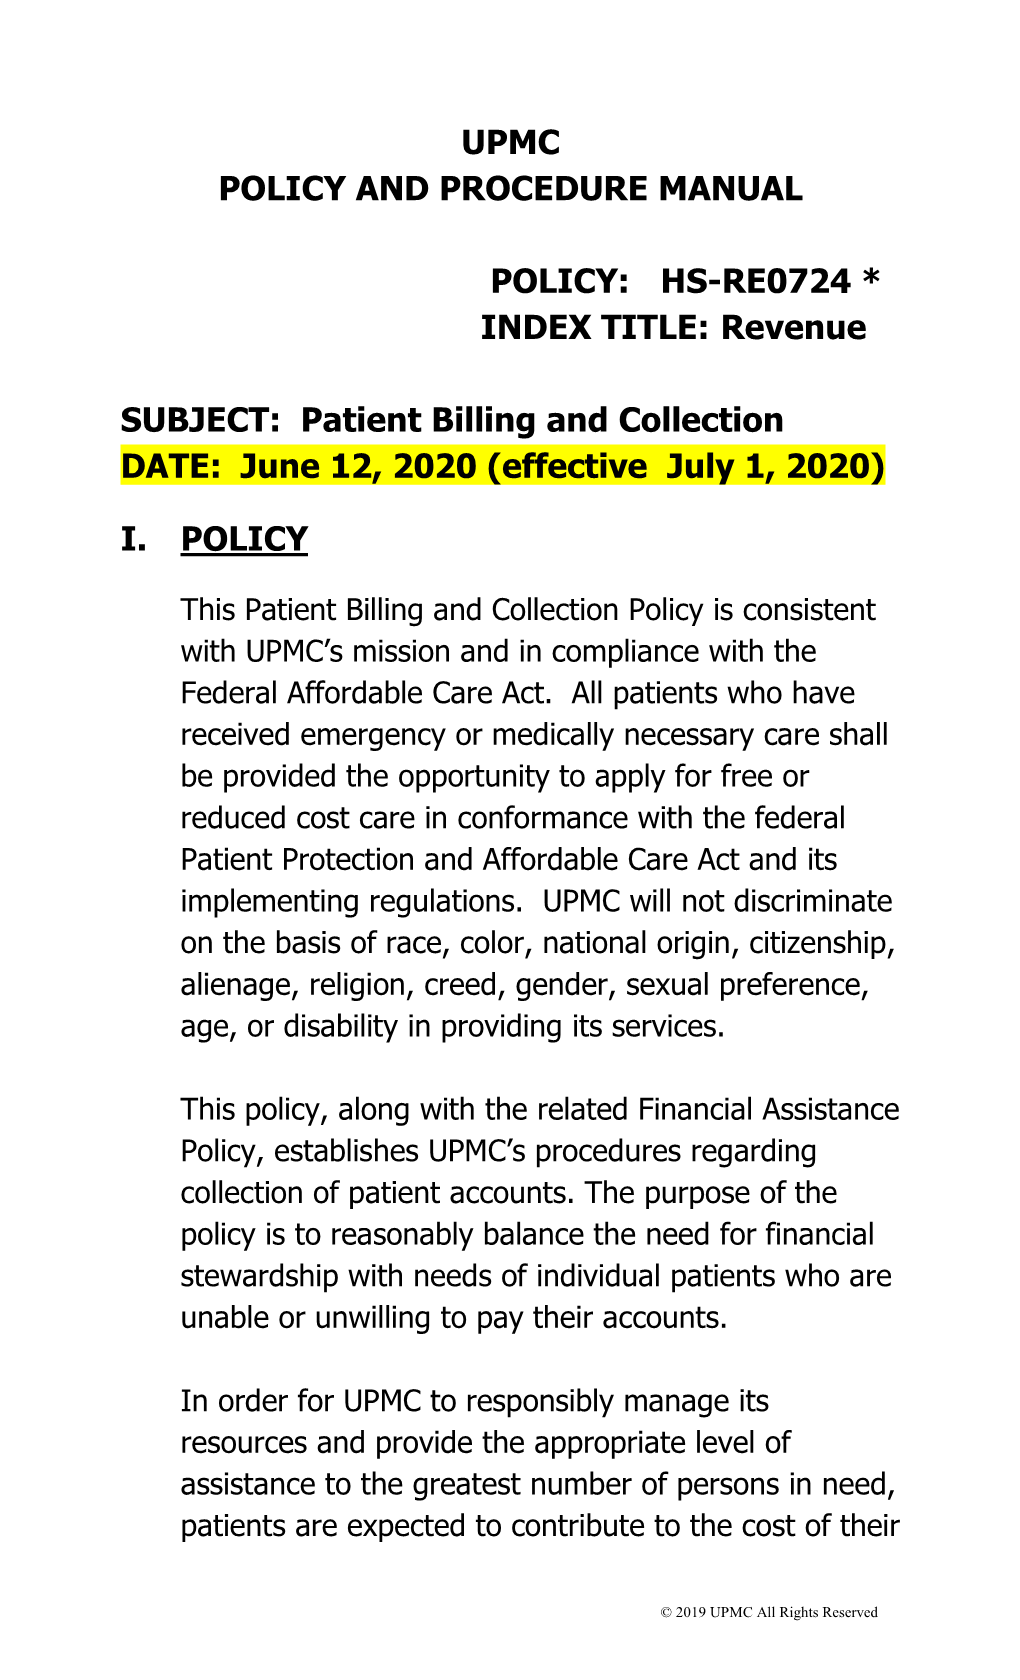 Billing and Collections Policy | Large Print